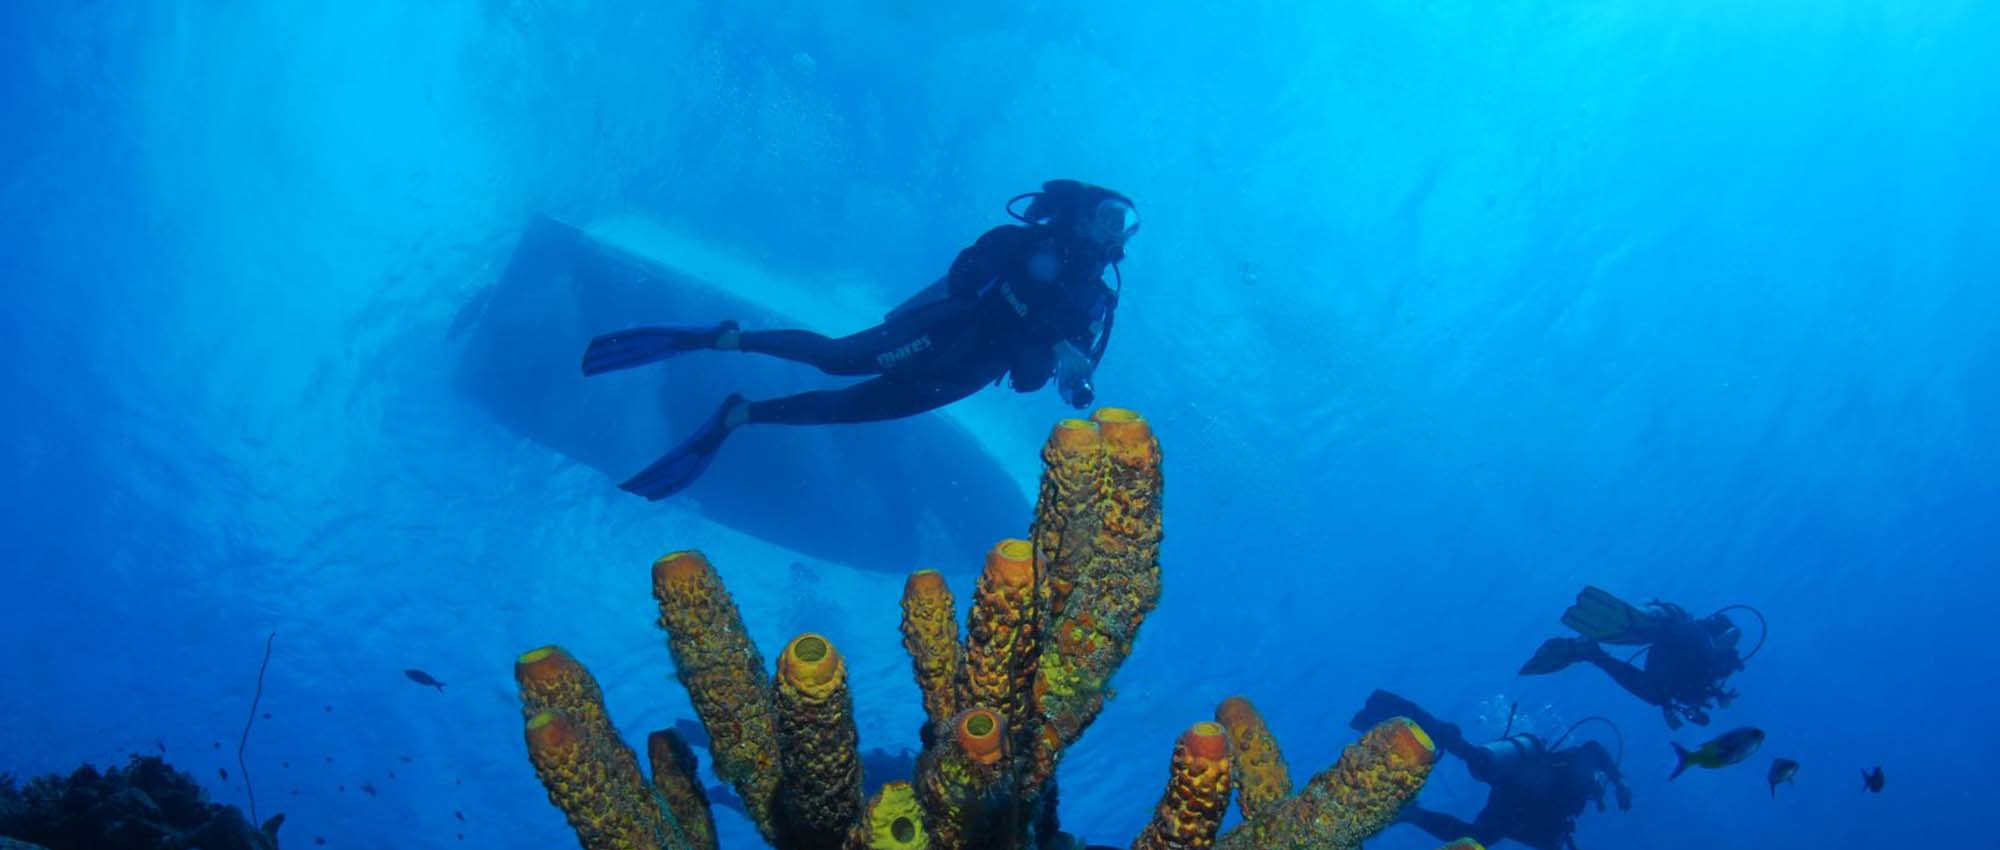 A few divers swimming near some coral